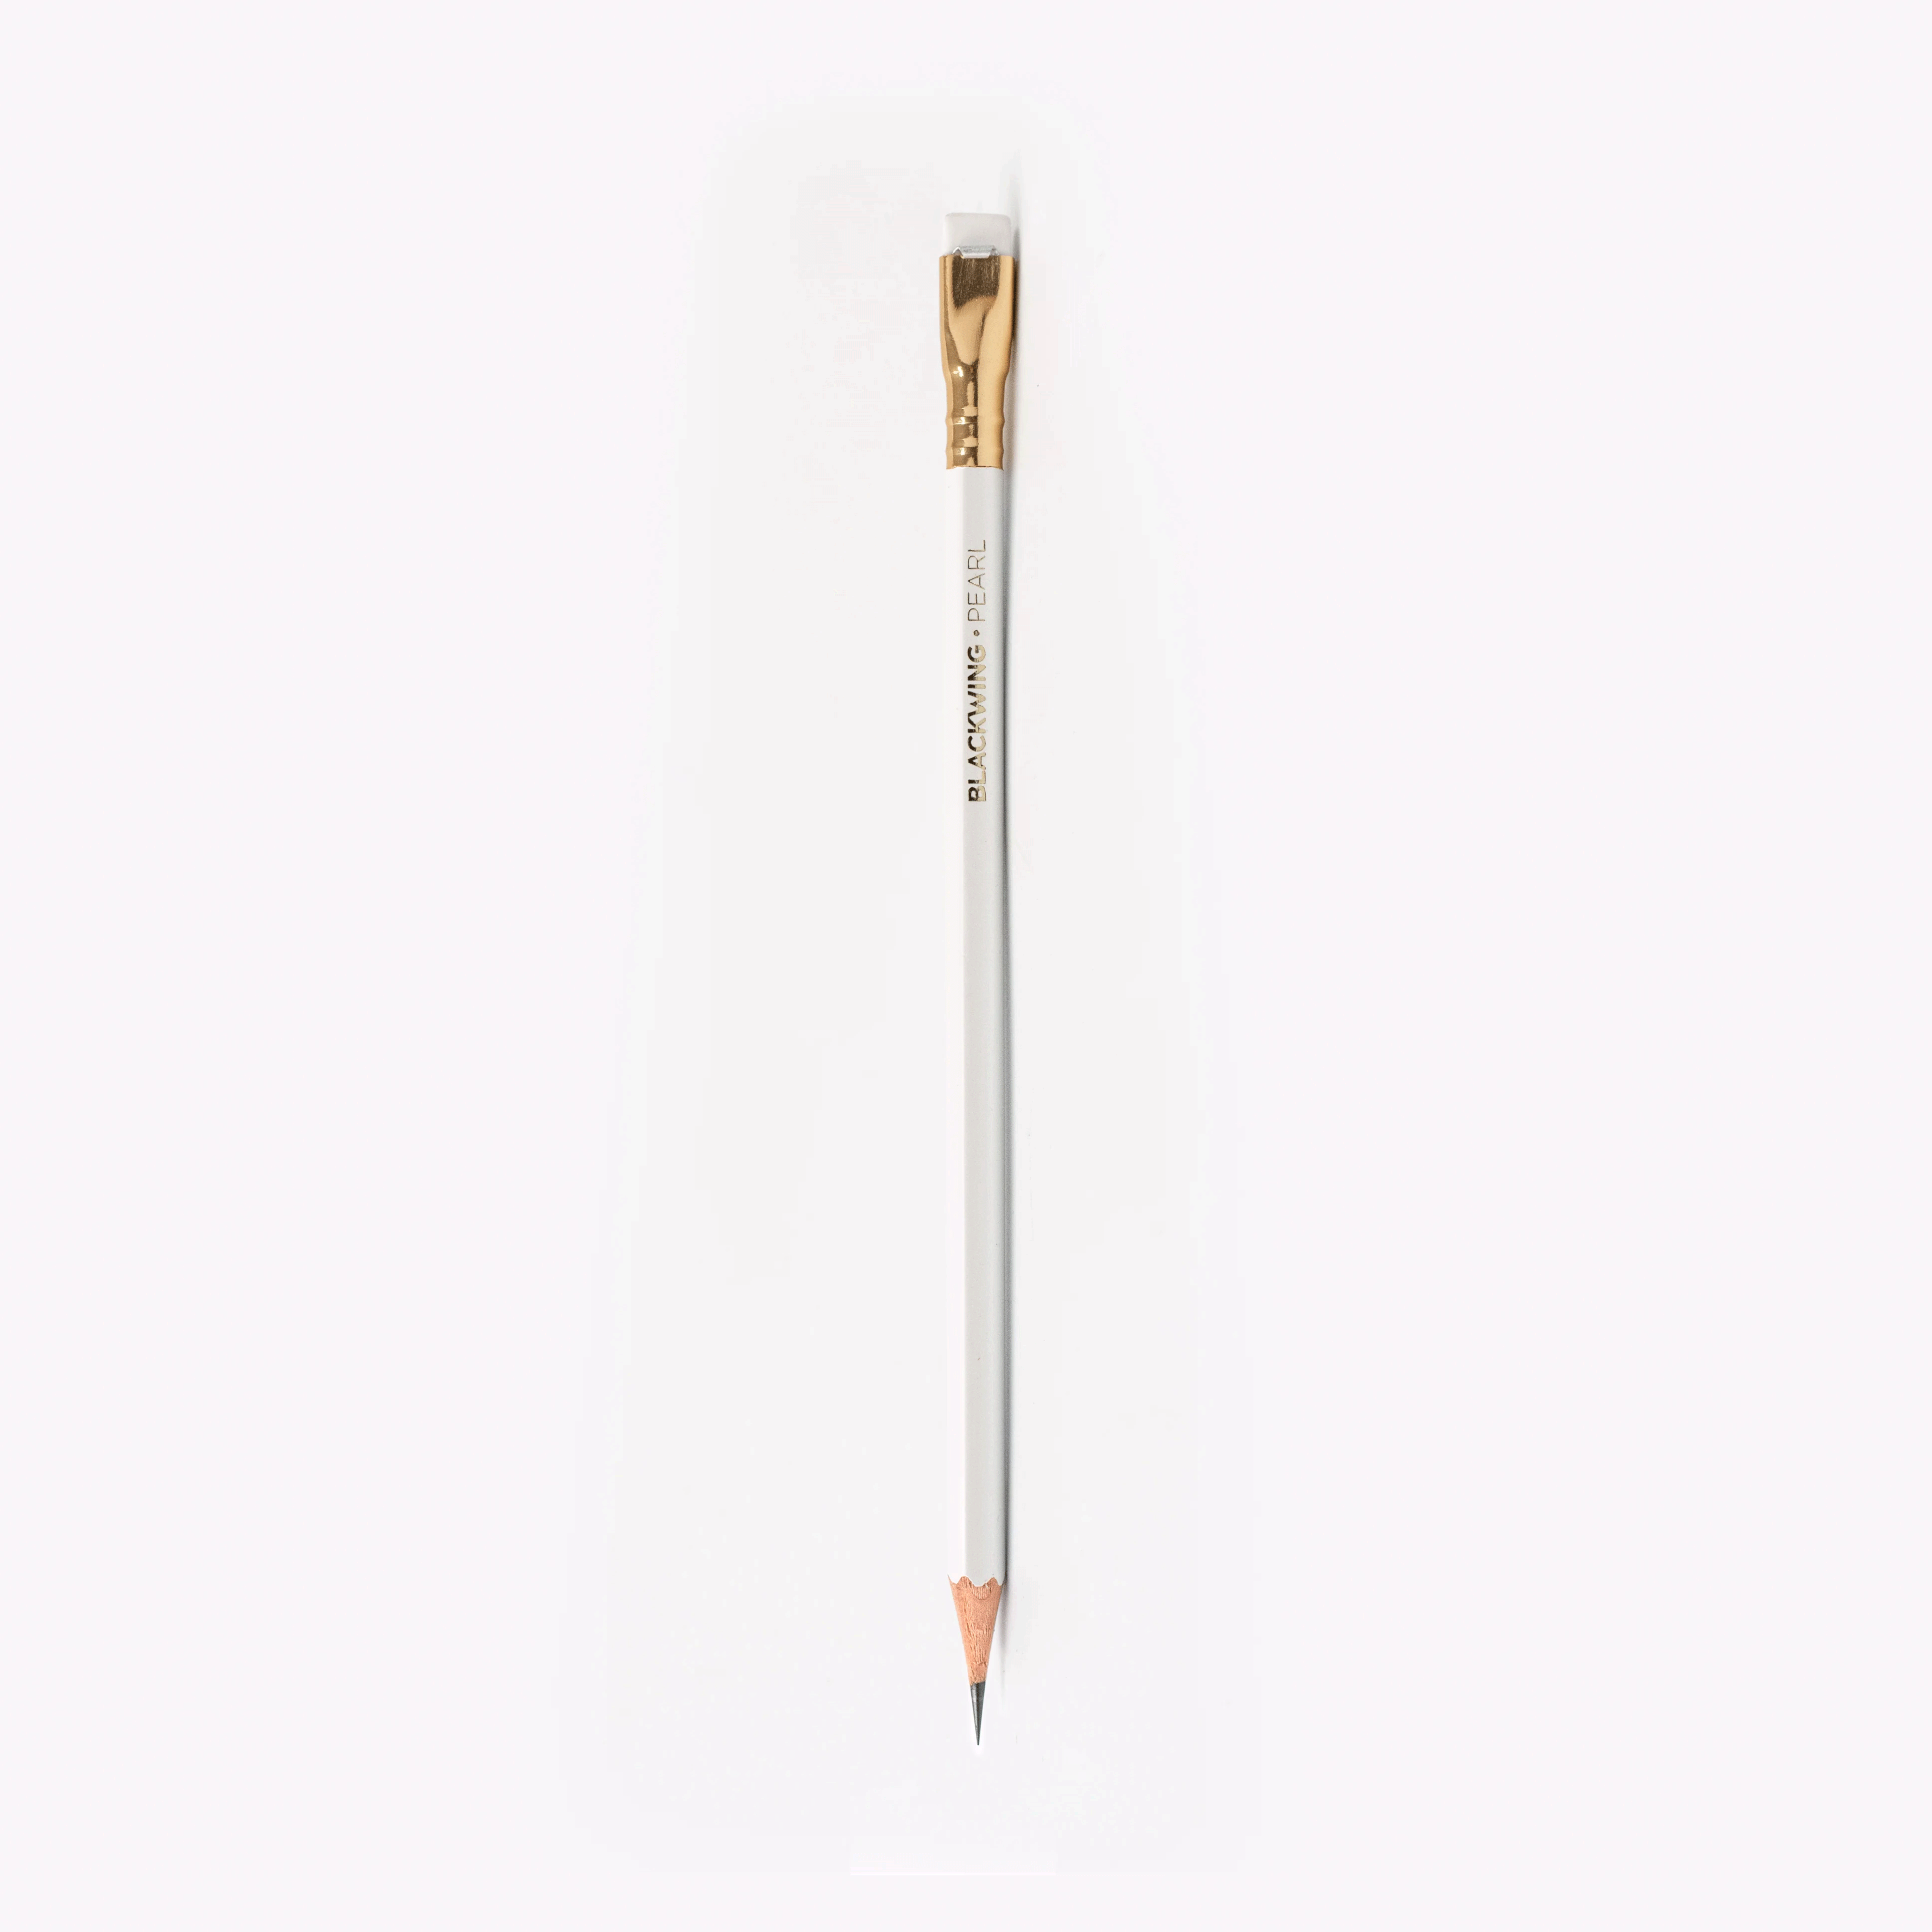 Blackwing Pearl - Pencraft the boutique